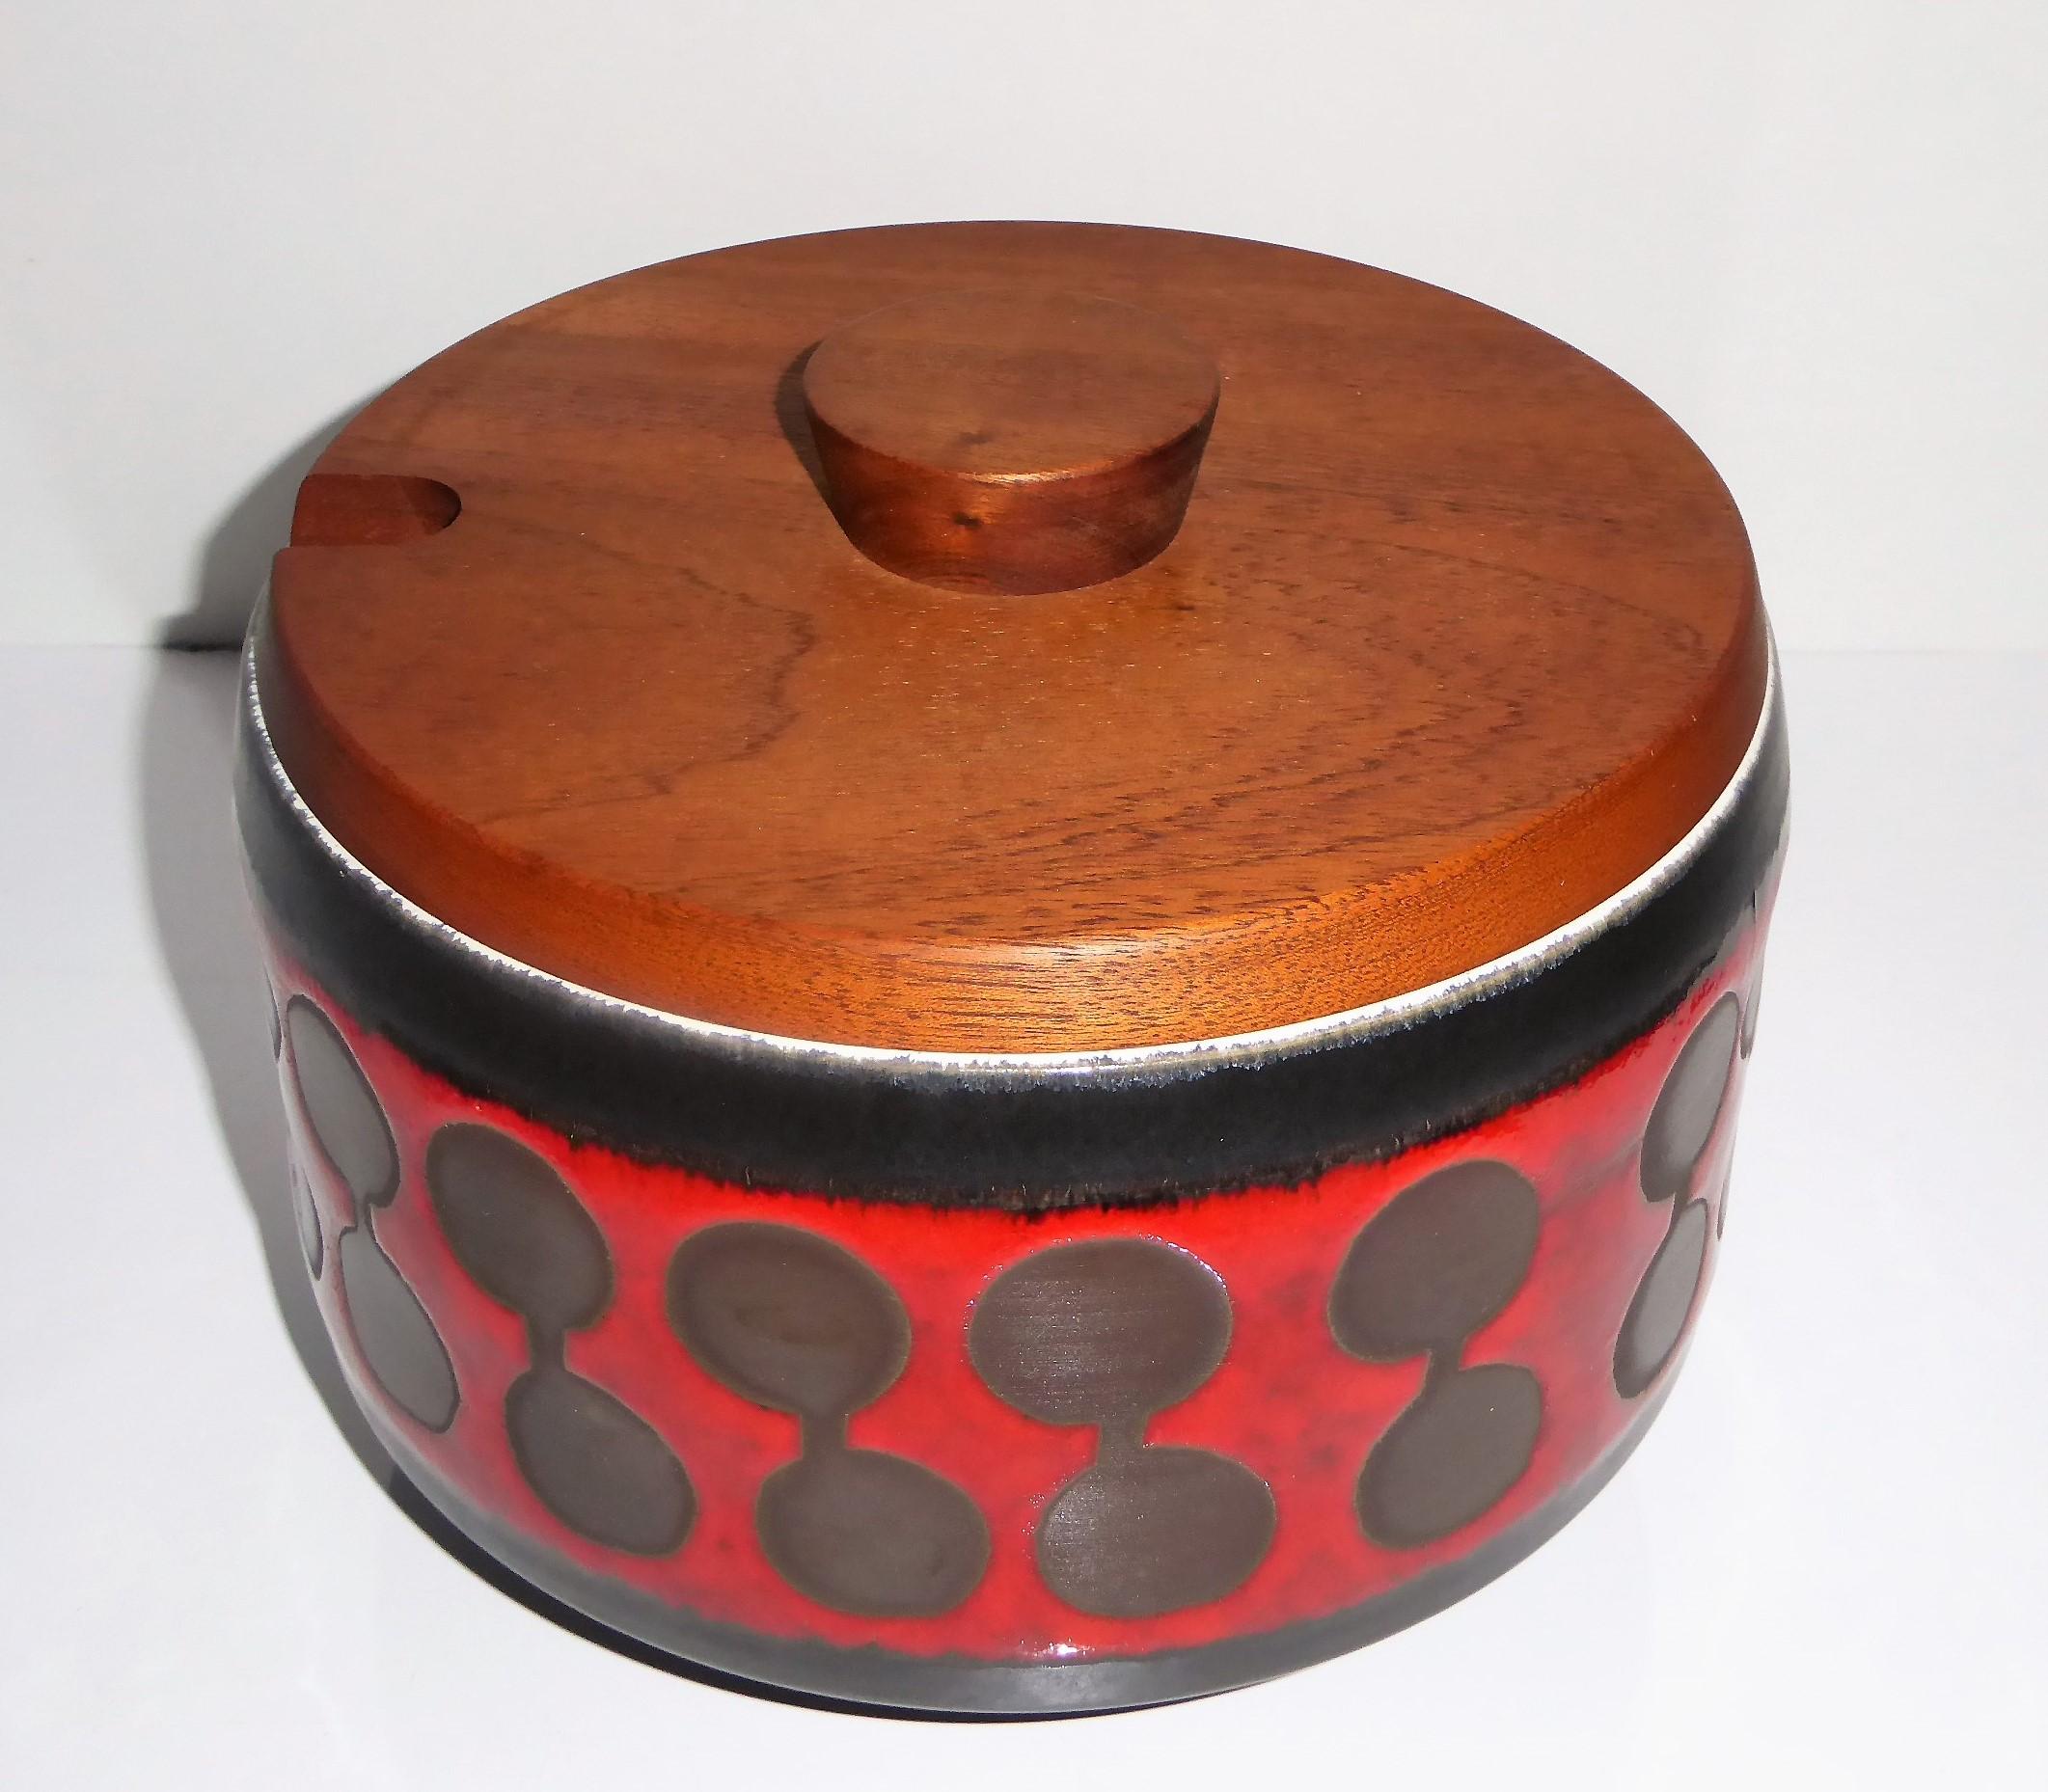 REDUCED FROM $250....Large Modern Soup Tureen with Teak top from the 1970s Germany, more than likely made by Carsten. Decorated with recurring charcoal colored Barbells on a bright red band over a black glazed background.   German Lava glaze era. 